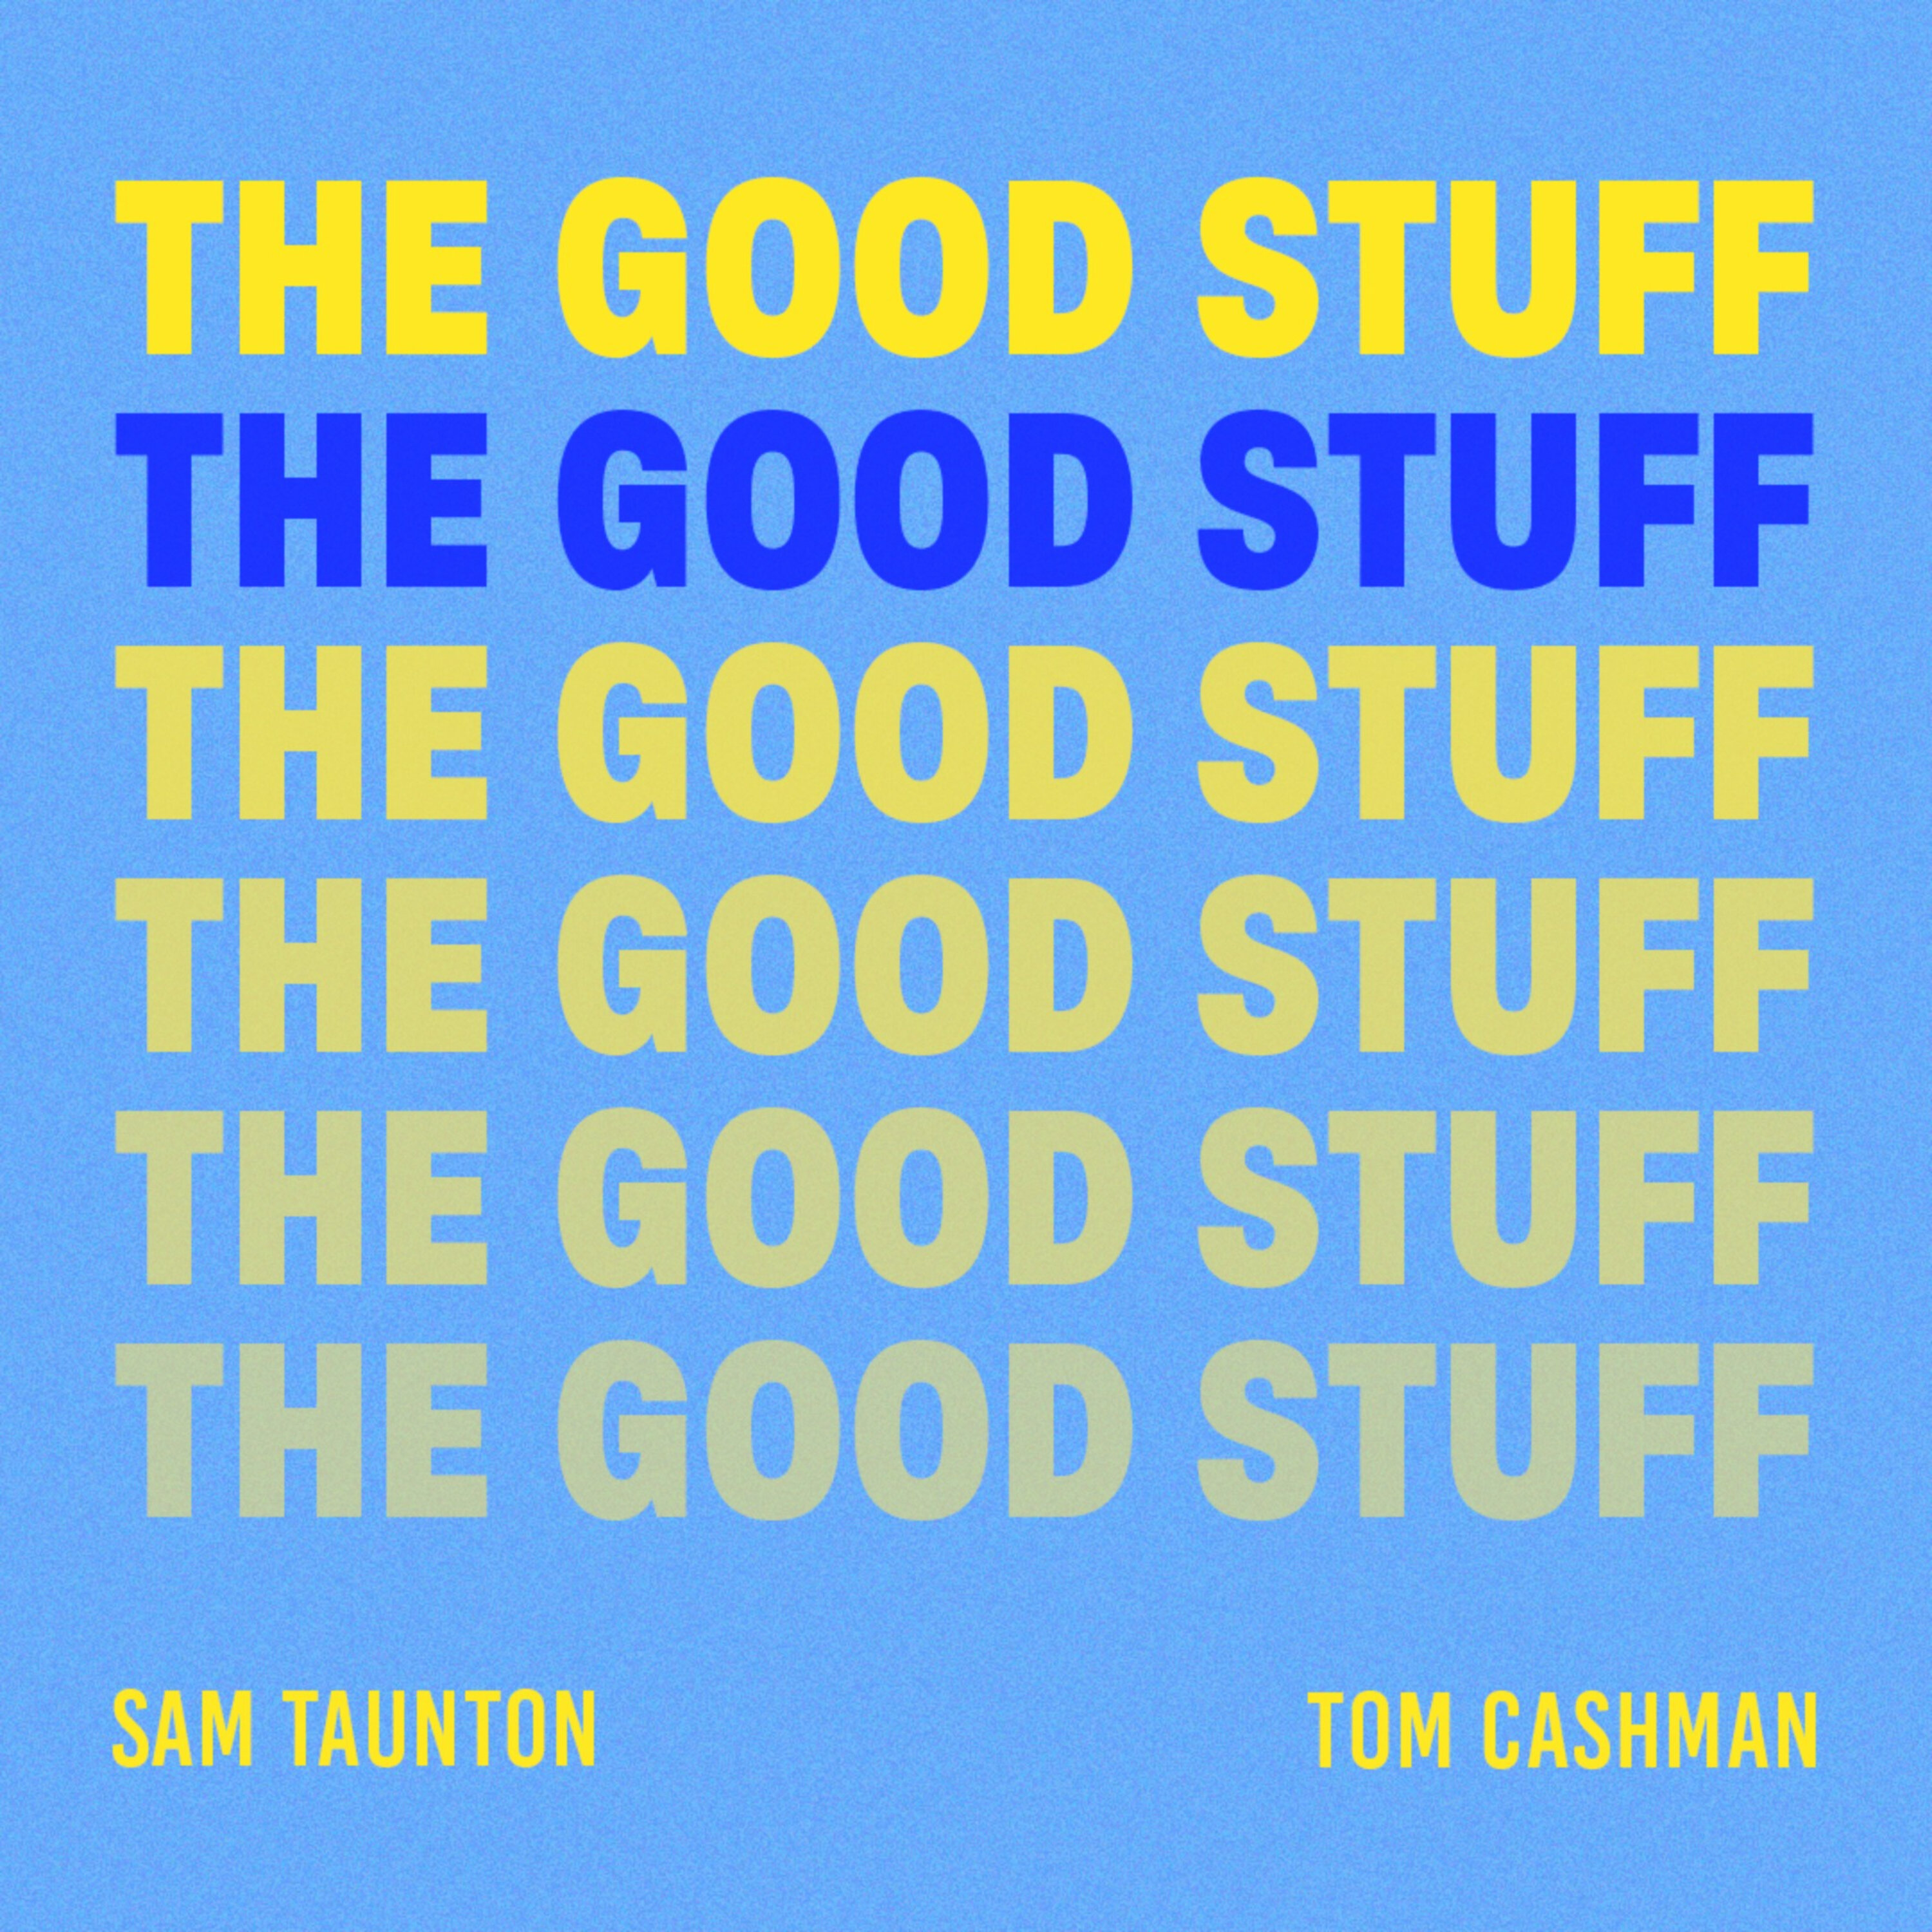 The Good Stuff - Episode 59 - The Australian Accent and Identity Theft